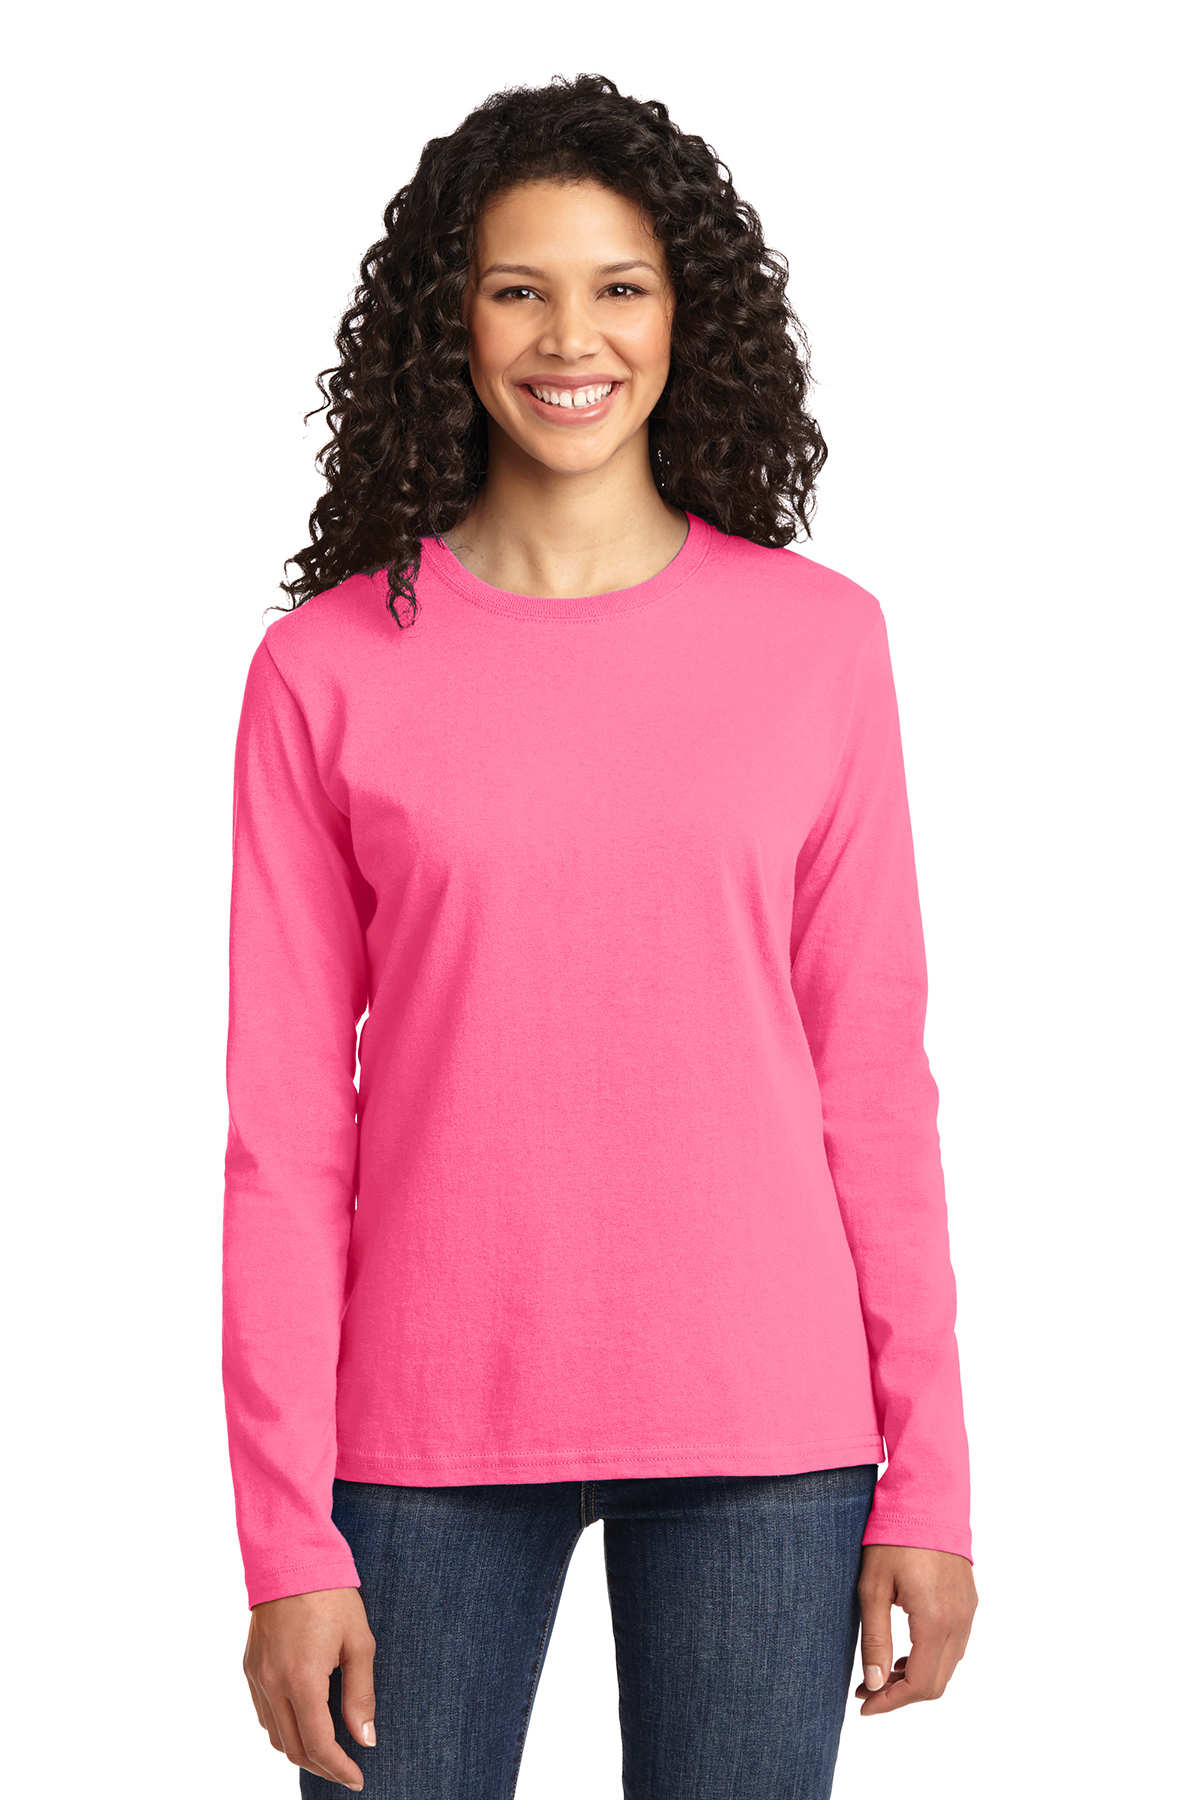 Port & Company Ladies Long Sleeve Core Cotton Tee | Product